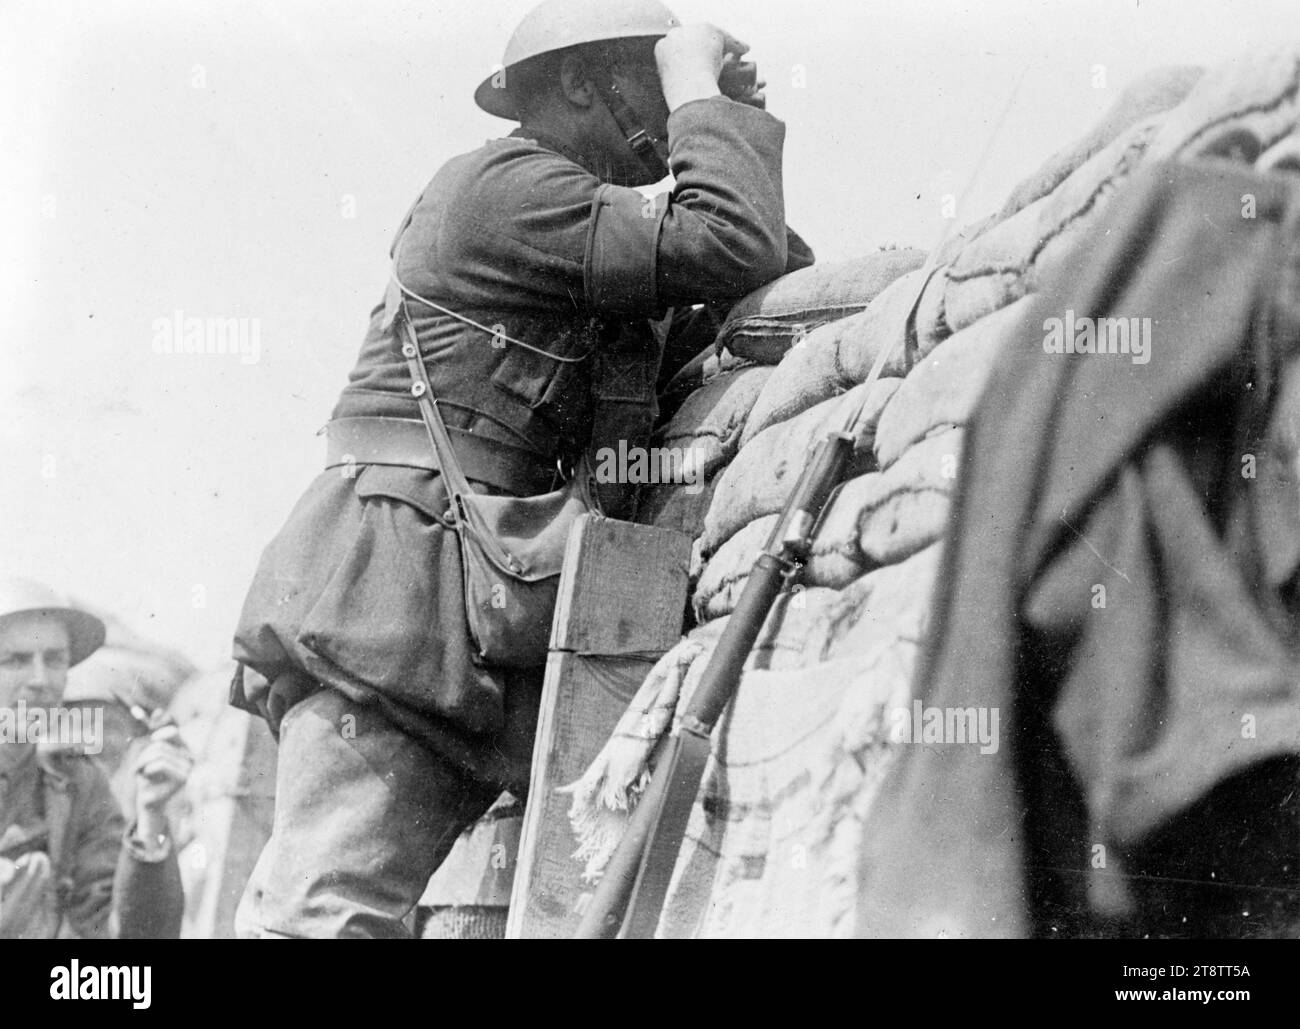 Major General Russell addressing the troops during World War I, The New Zealand Commander, Major-General Russell, addressing New Zealand troops from his horse during World War I. Photograph taken 1917 Stock Photo